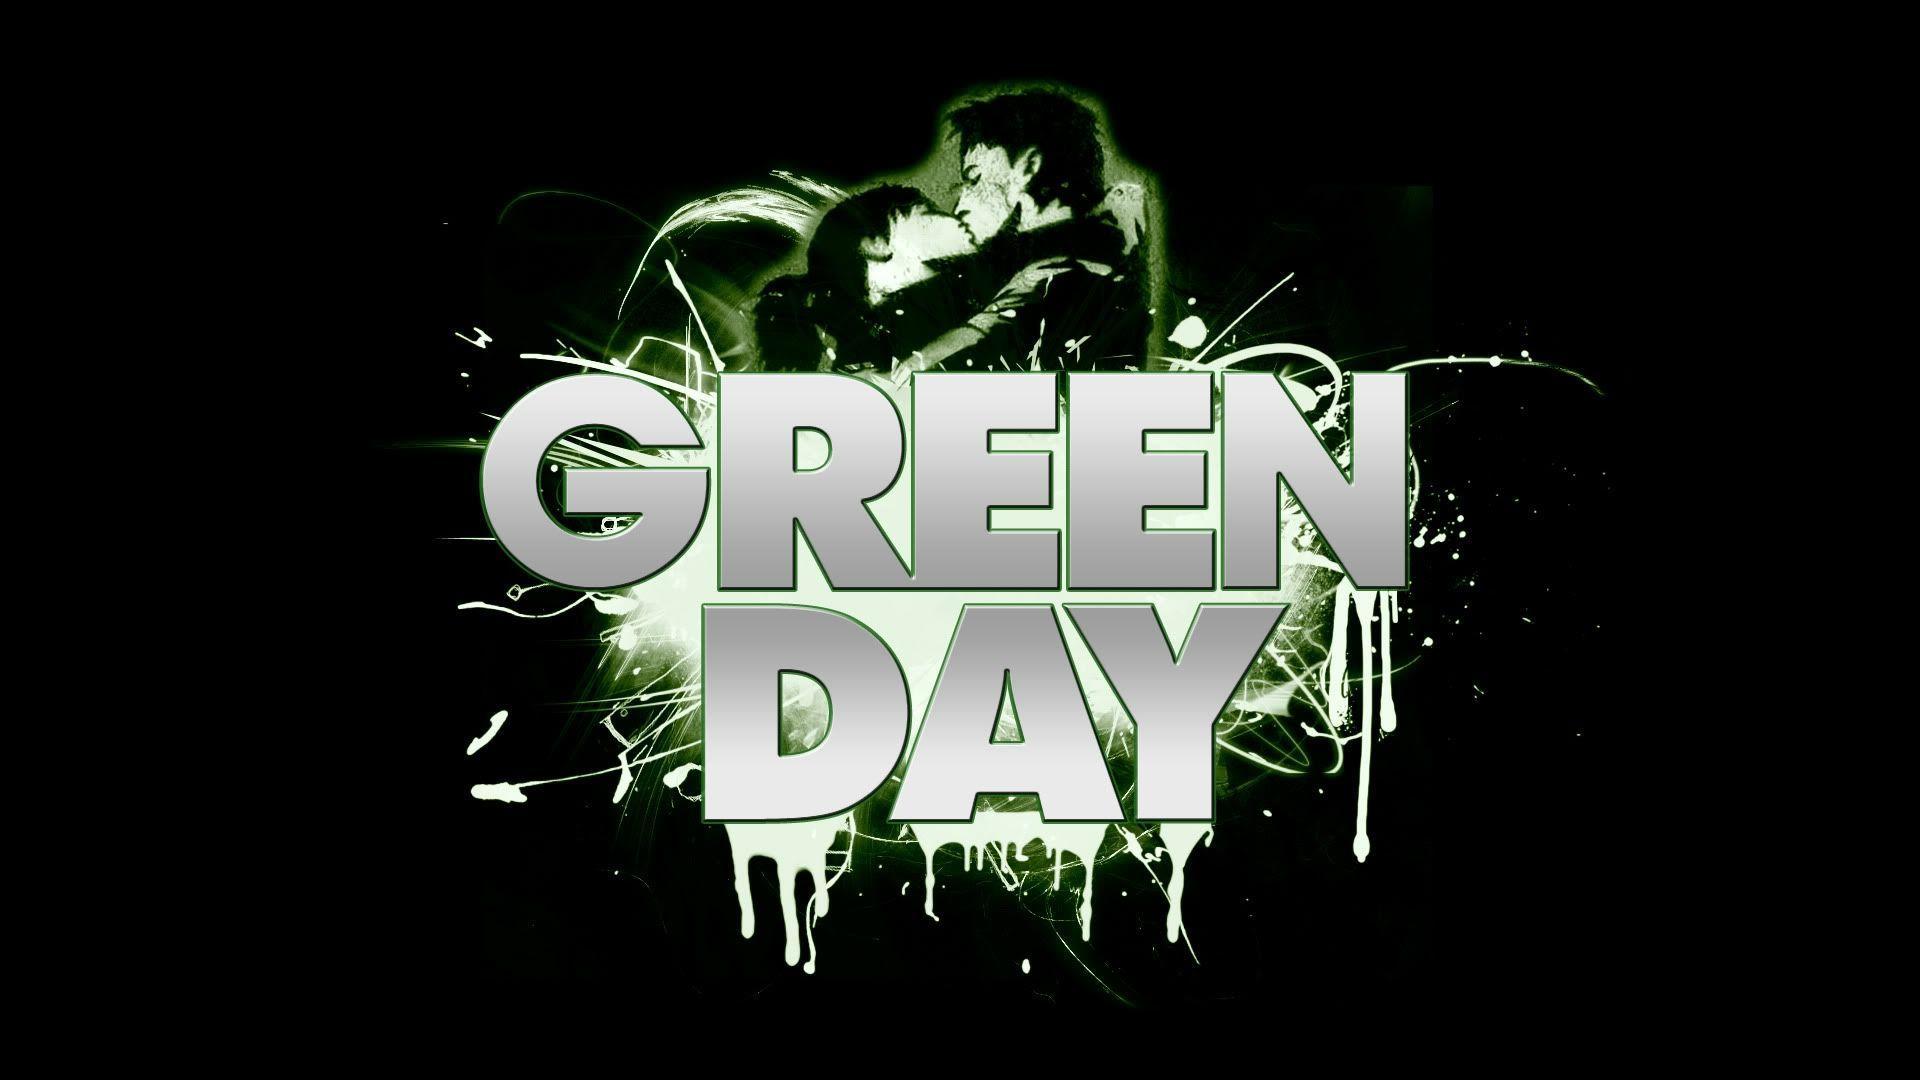 Green Day Letters Darkness Wallpapers 1920x1080 px Free Download